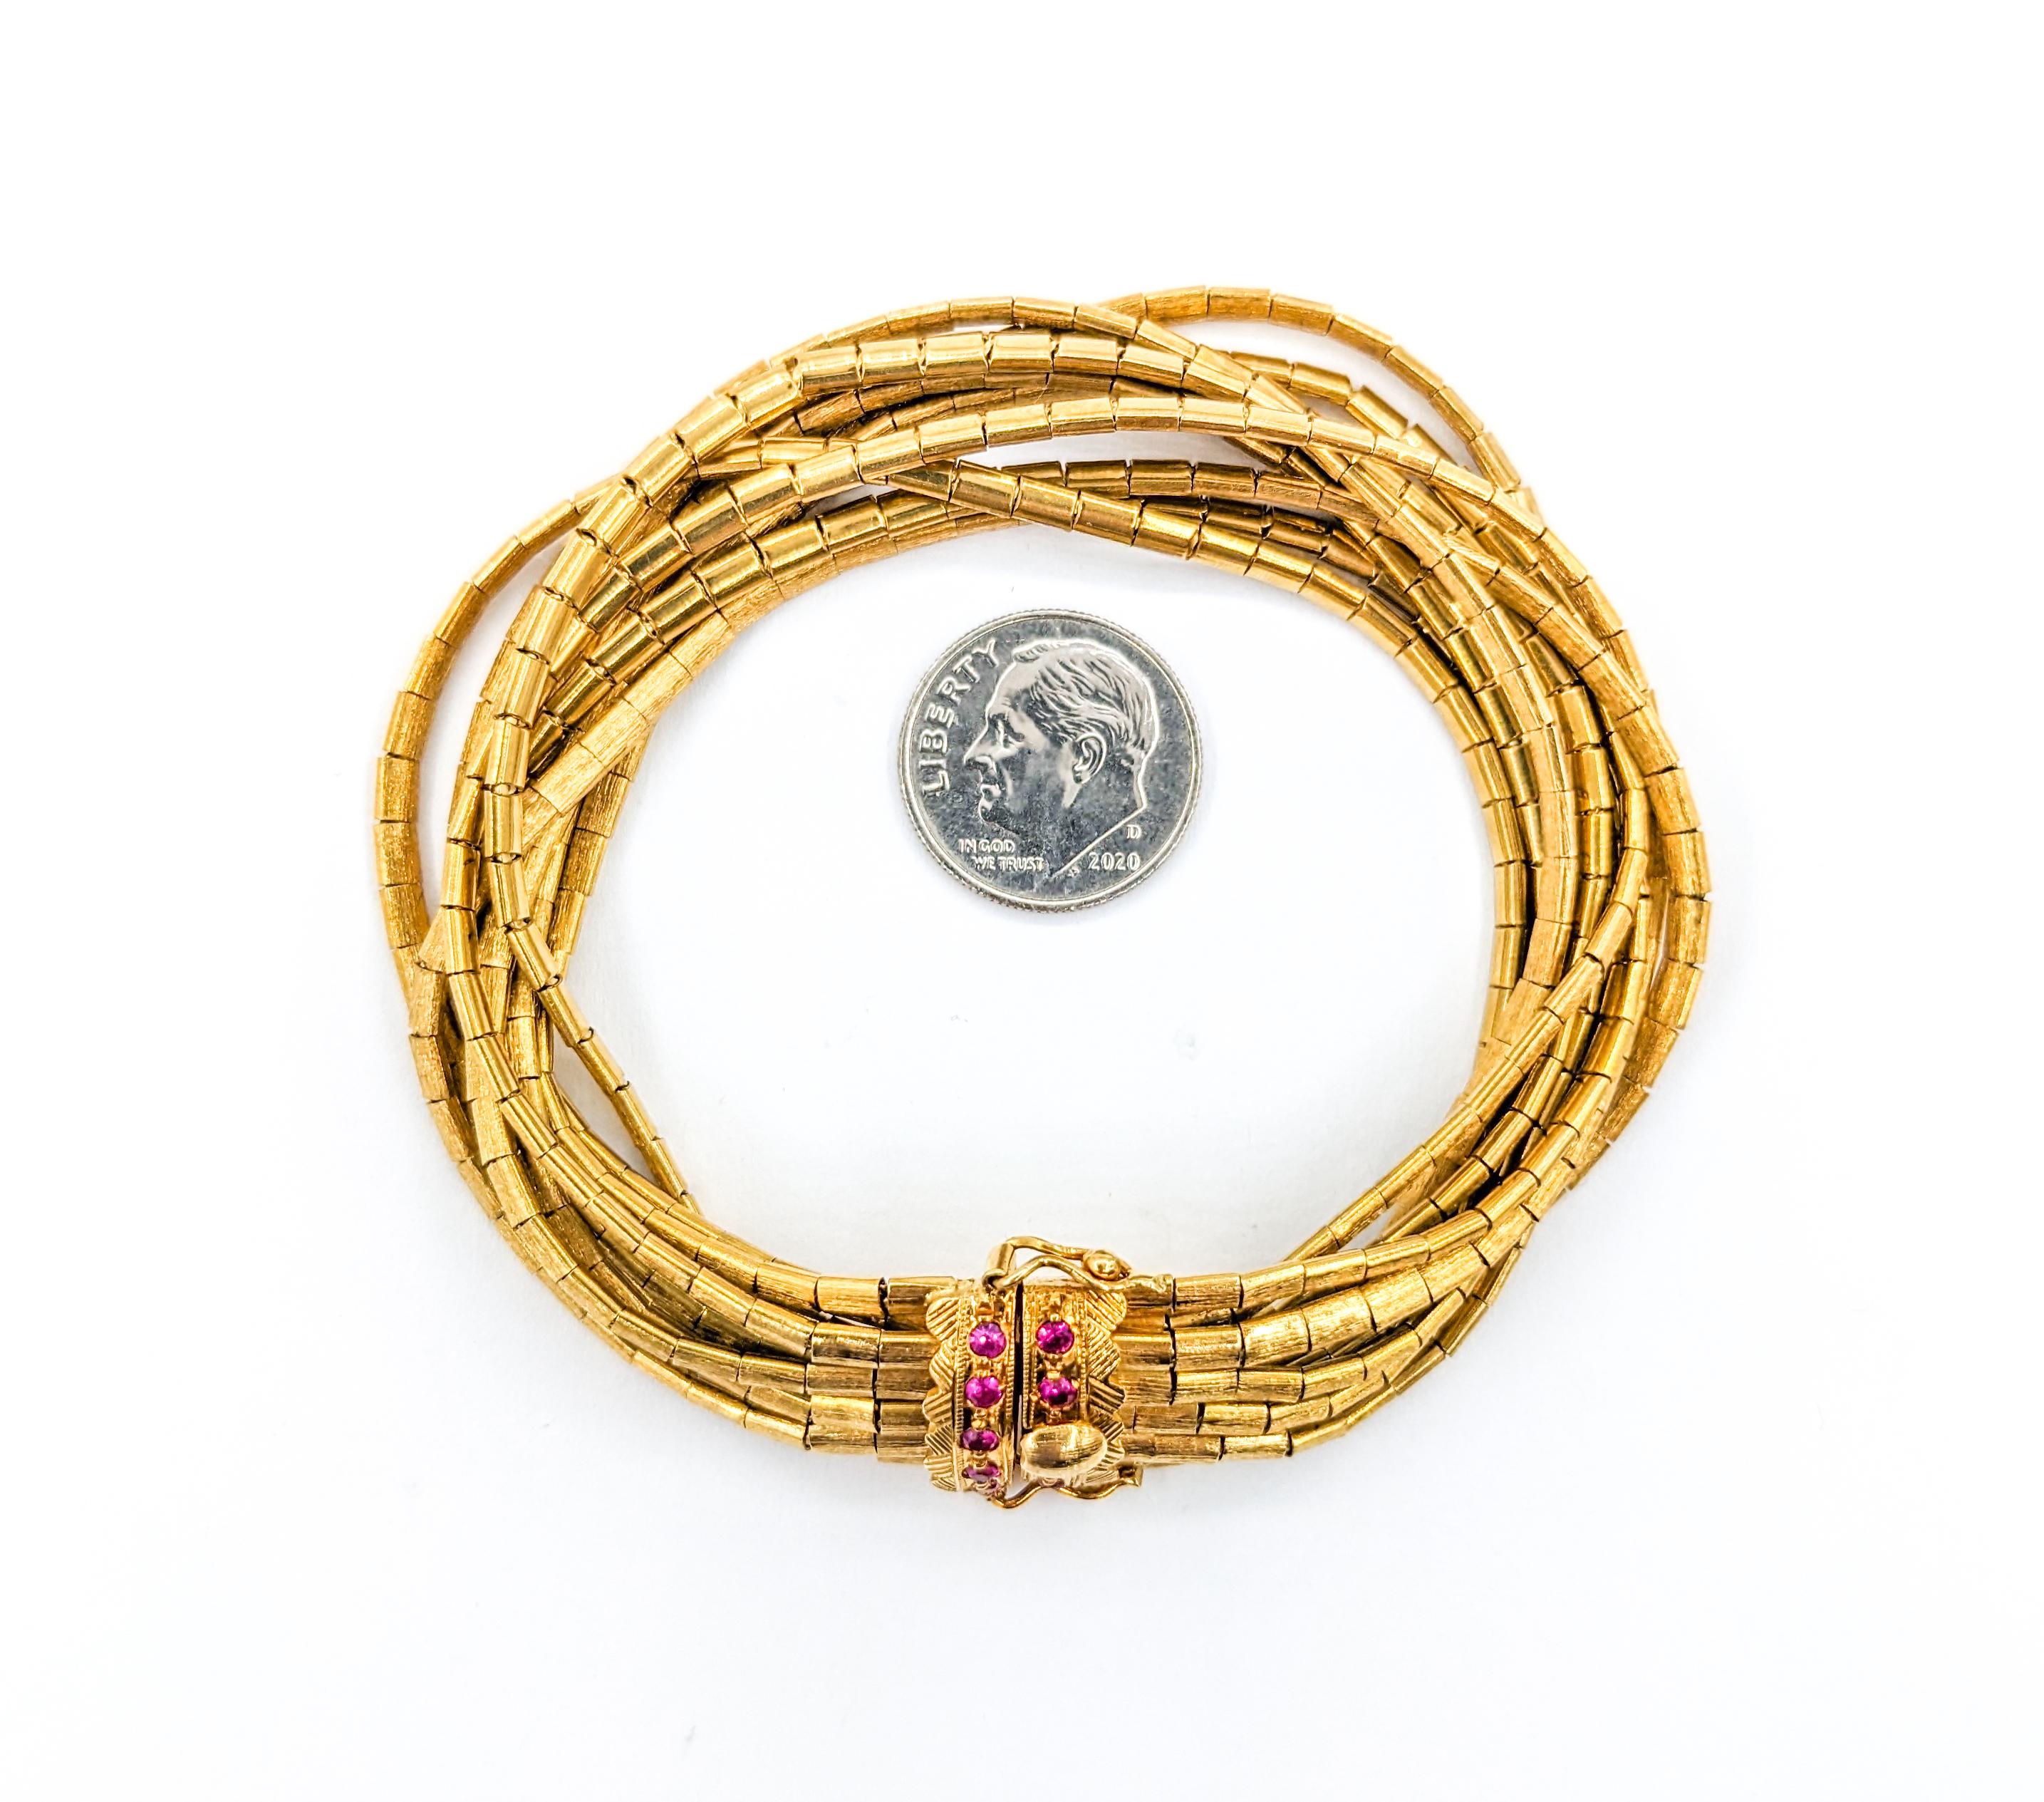 Vintage 9-Strand Ruby Bracelet In Yellow Gold

Behold the grandeur of our Vintage 9-Strand Bracelet, a testament to timeless design and opulence, forged in 18kt yellow gold. It boasts a quarter-carat total weight of radiant rubies, each one selected